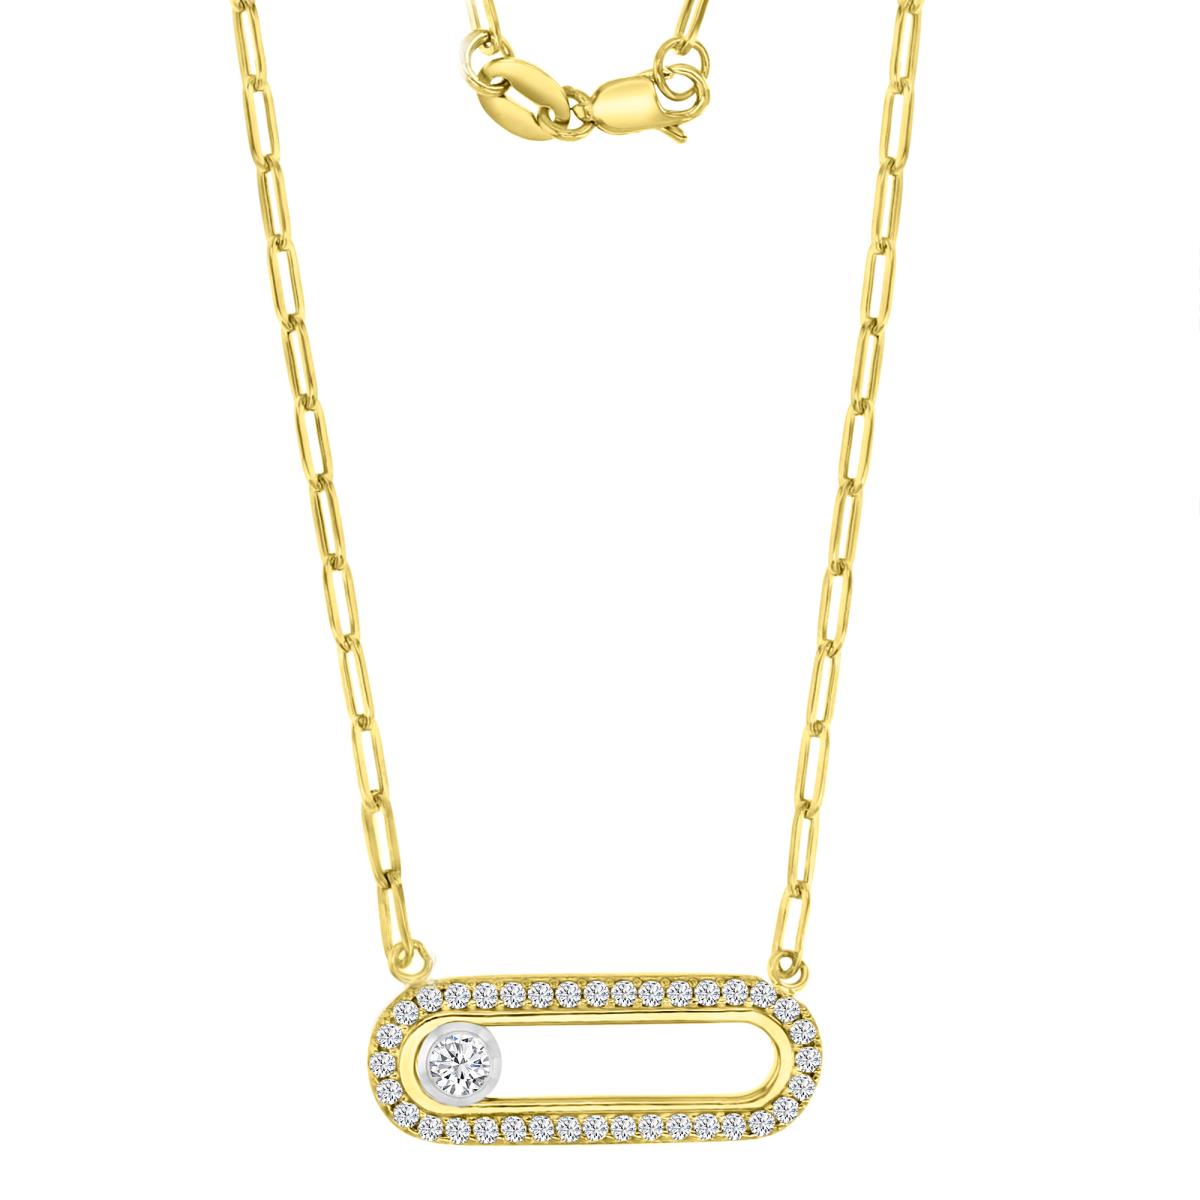 14K Yellow & White Gold 21.5X8MM Polished Paper Clip & Wlhite CZ Moving Circle 18" Necklace